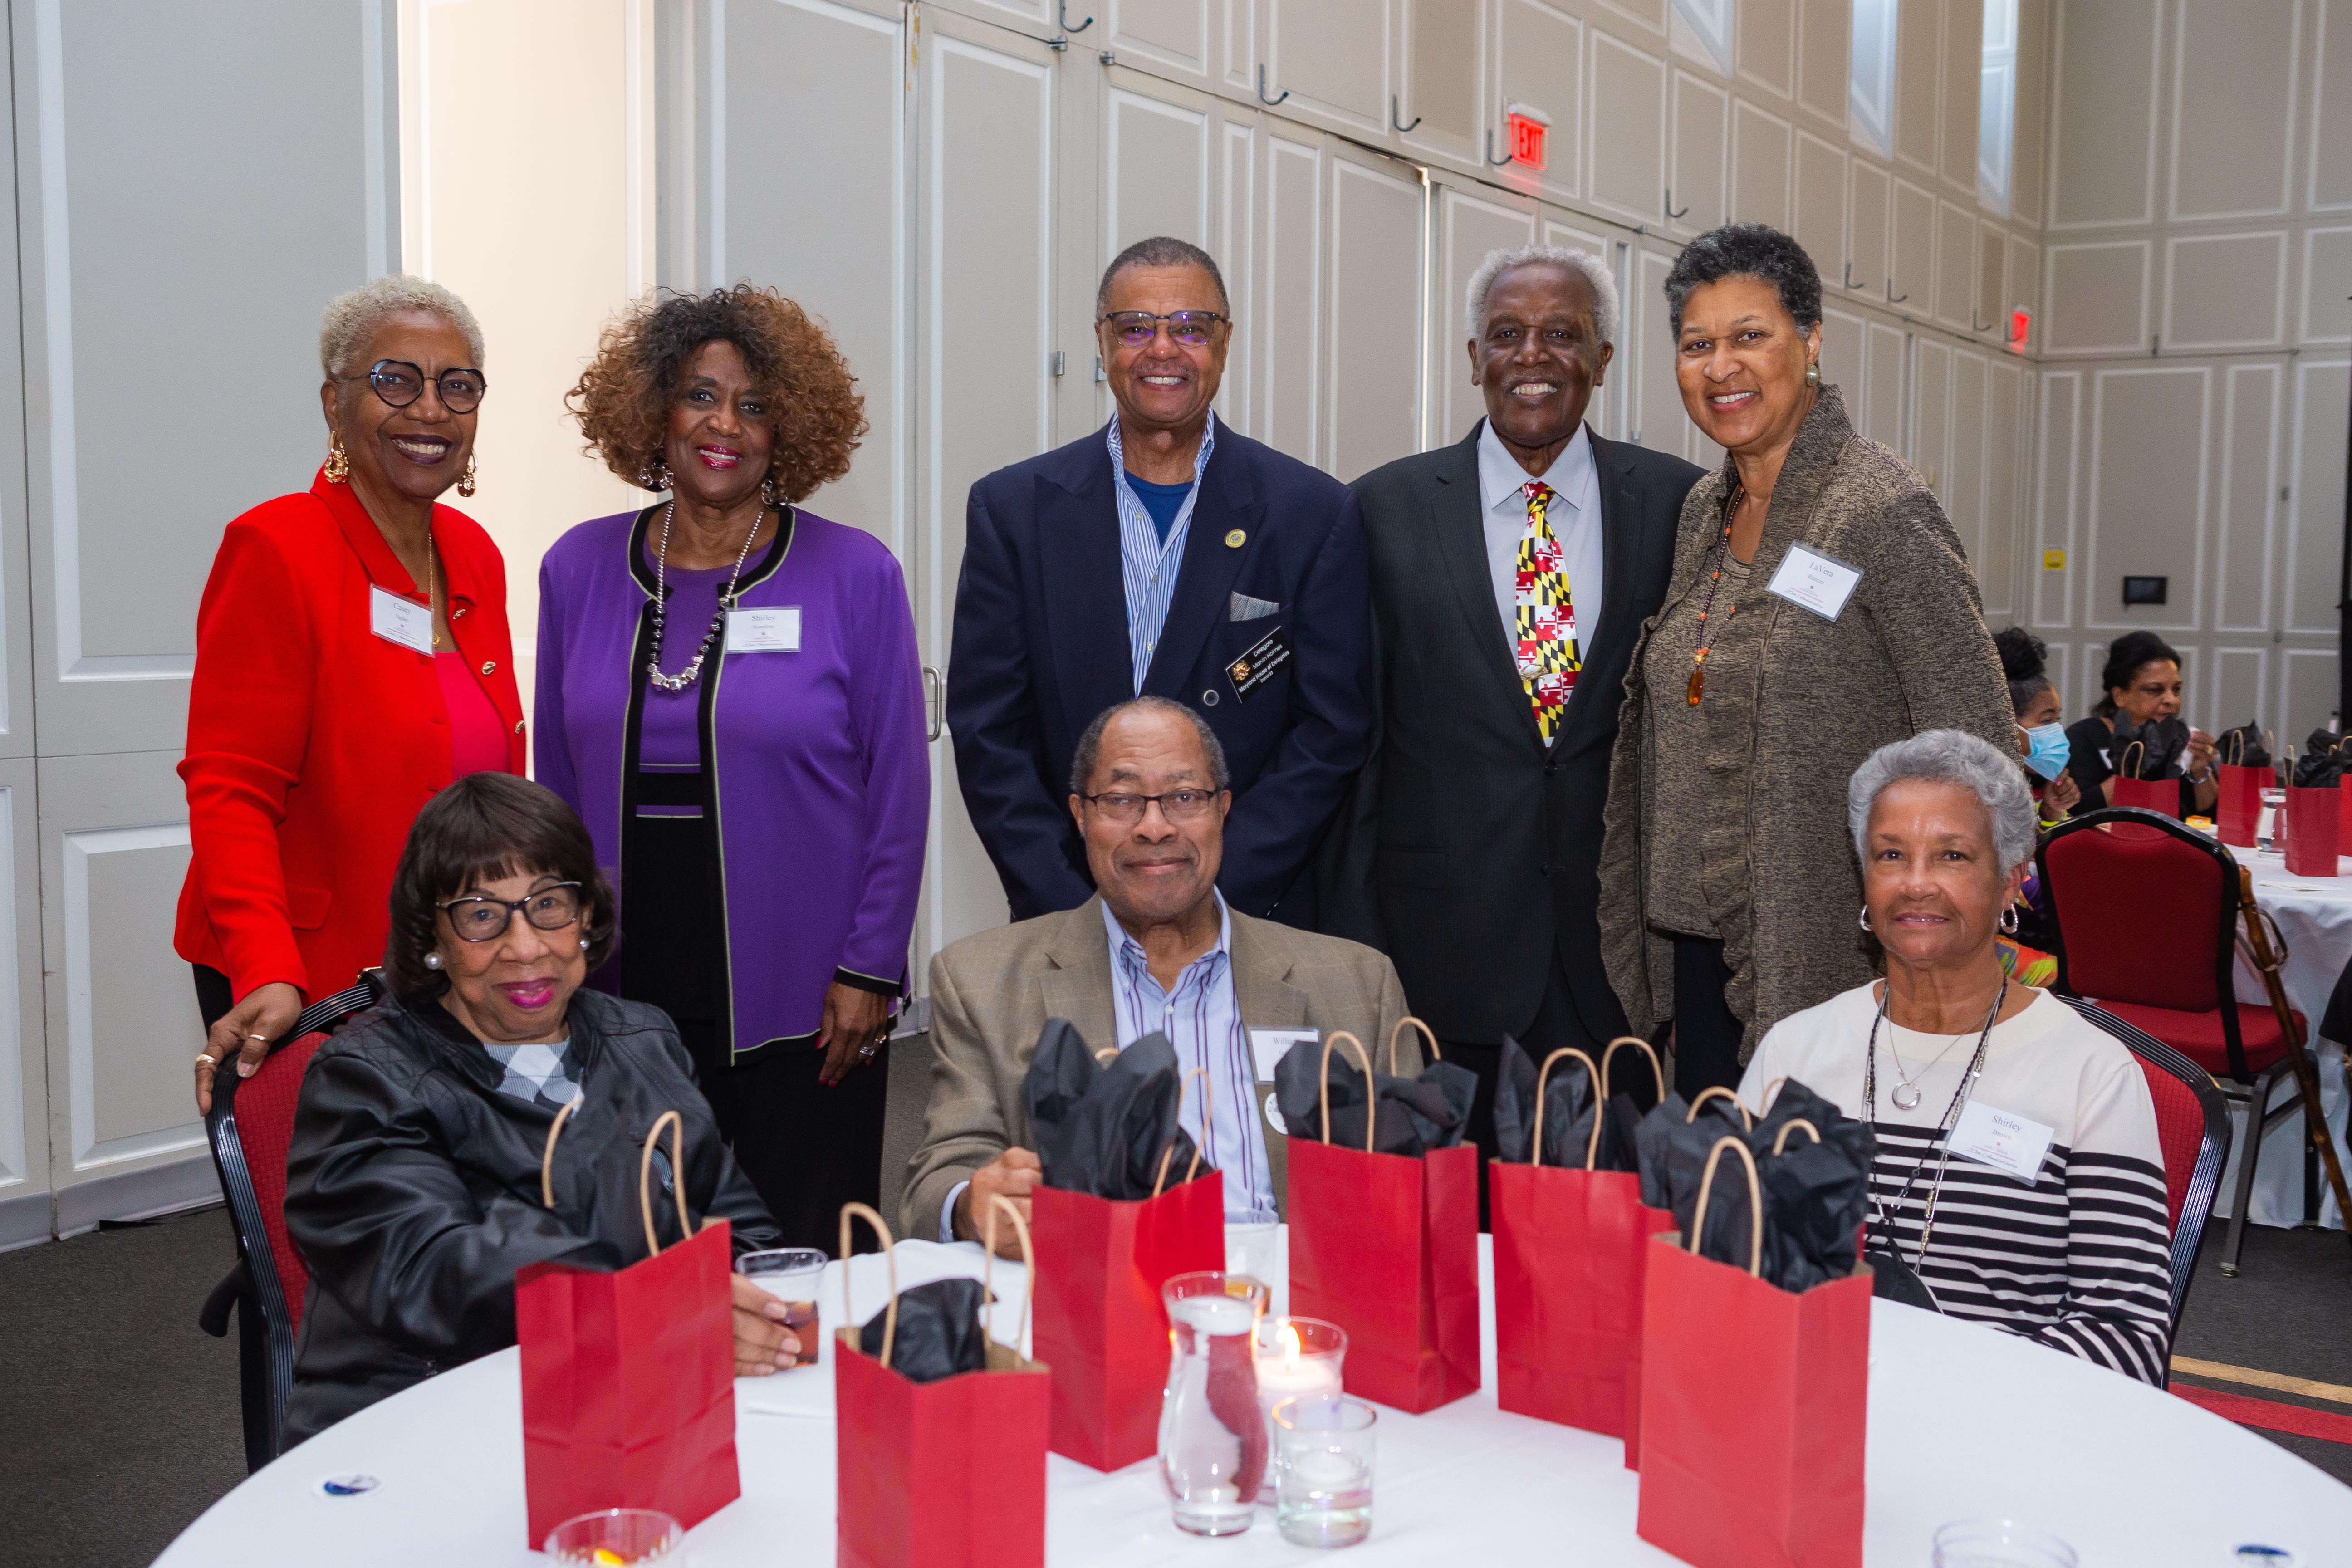 Supporters of the University of Maryland School of Public Health Legacy Leadership Institute for Public Policy gather to celebrate the program's 20th anniversary.